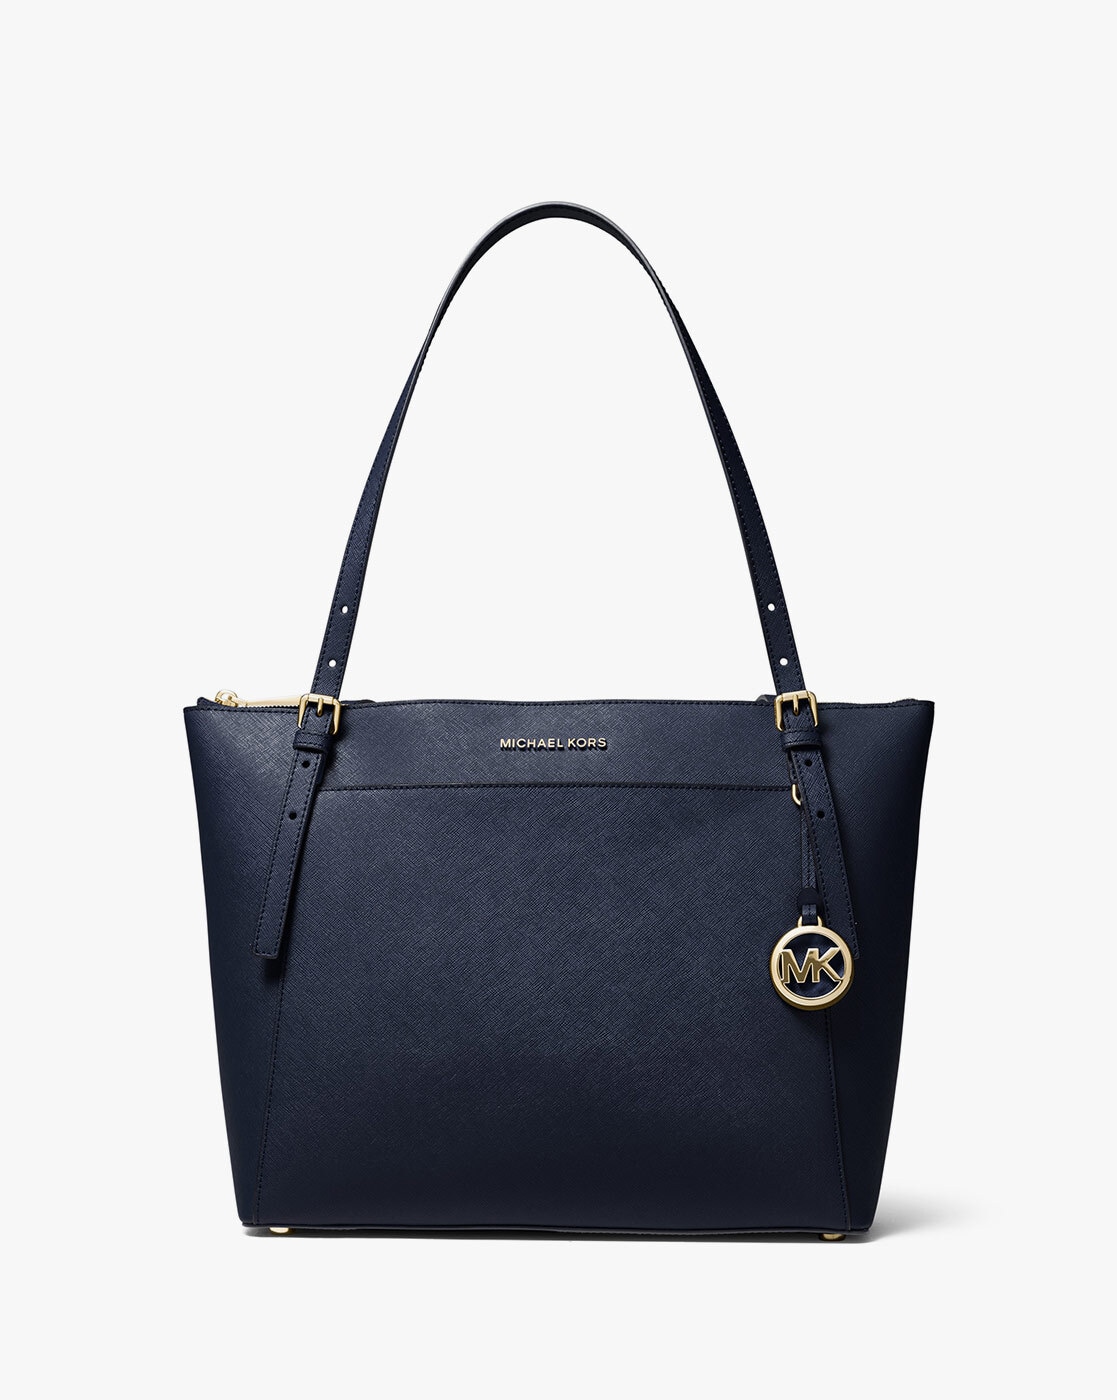 Jet set leather tote Michael Kors Navy in Leather - 38329384